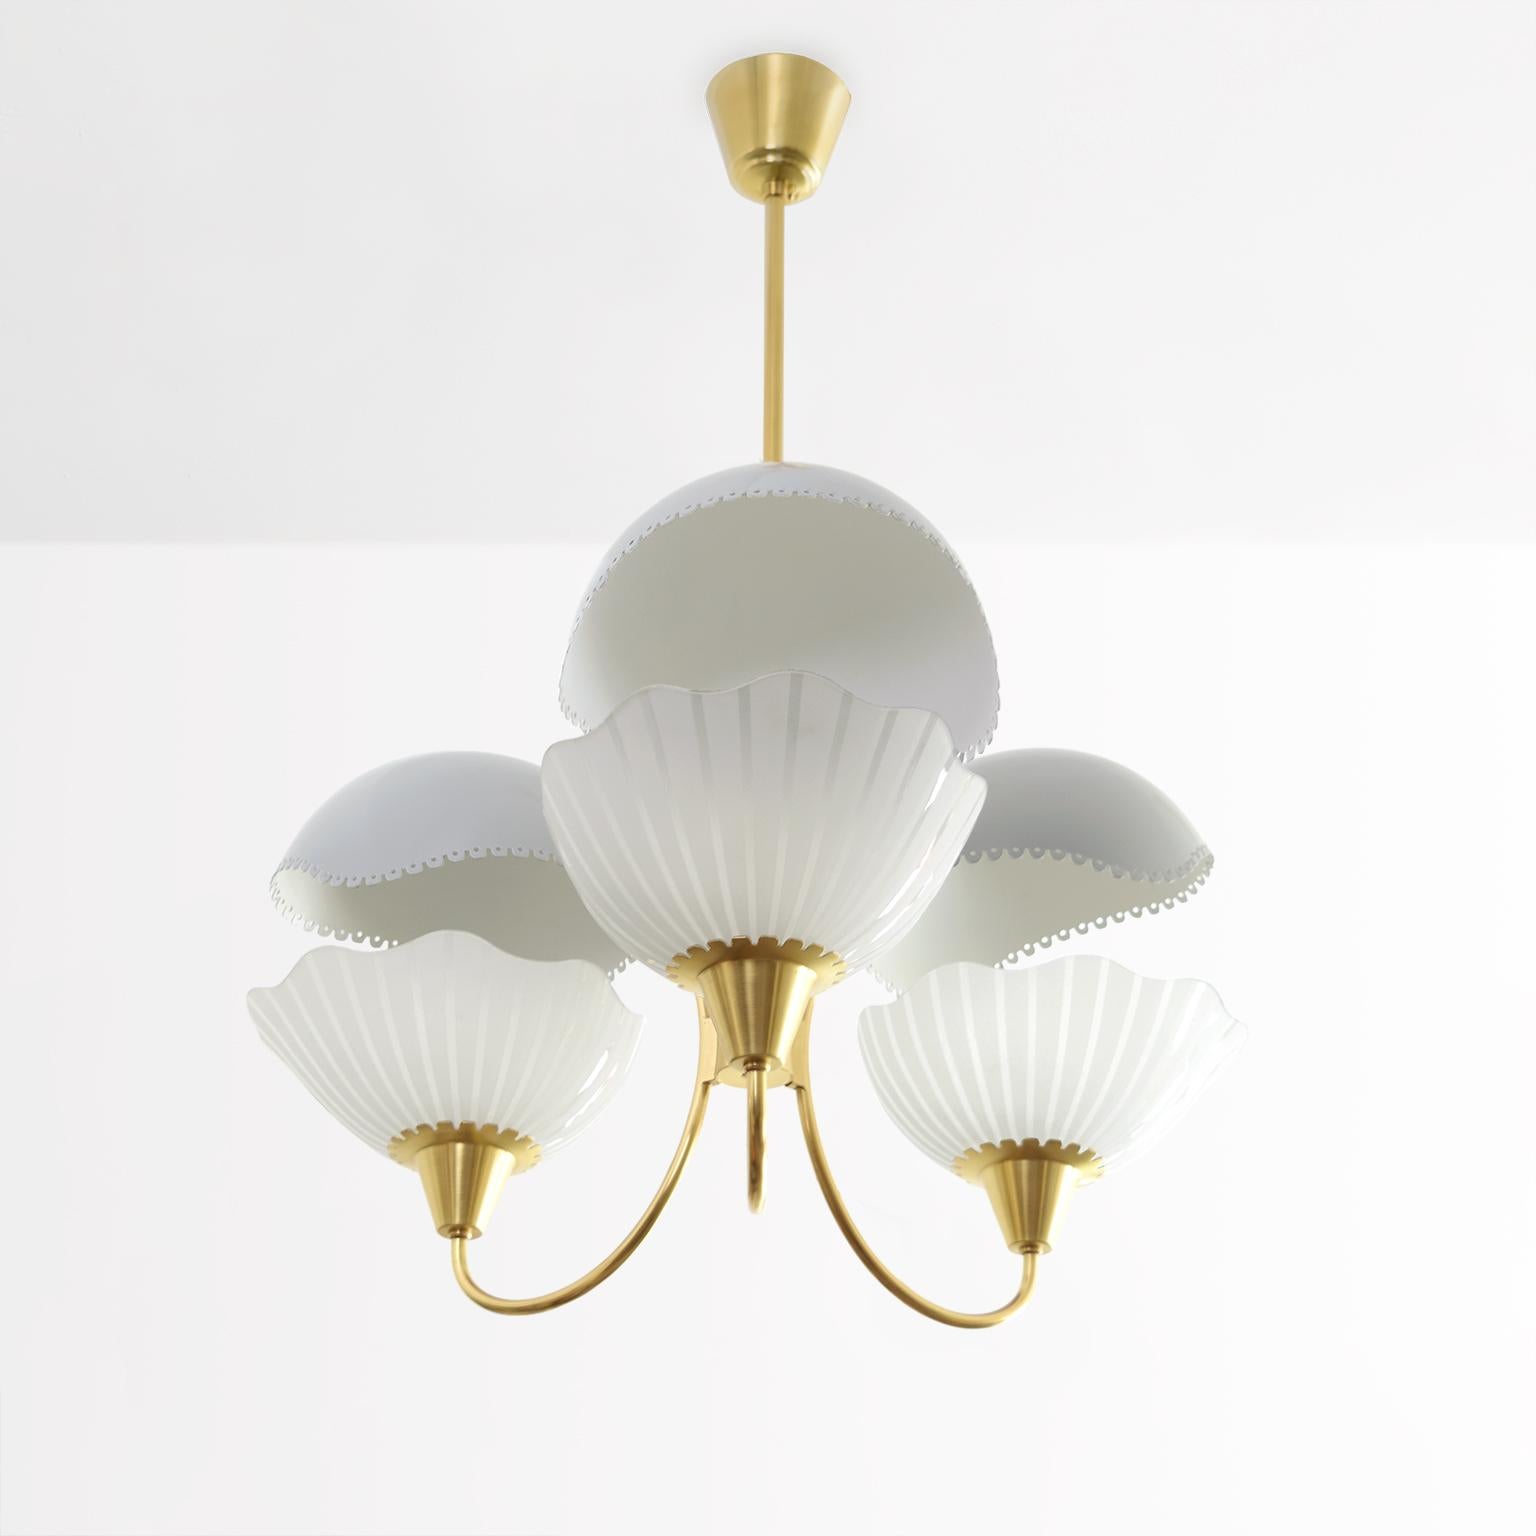 Scandinavian Harald Notini desigend for Orrefors 3-arm Chandelier with 3 etched glass shades